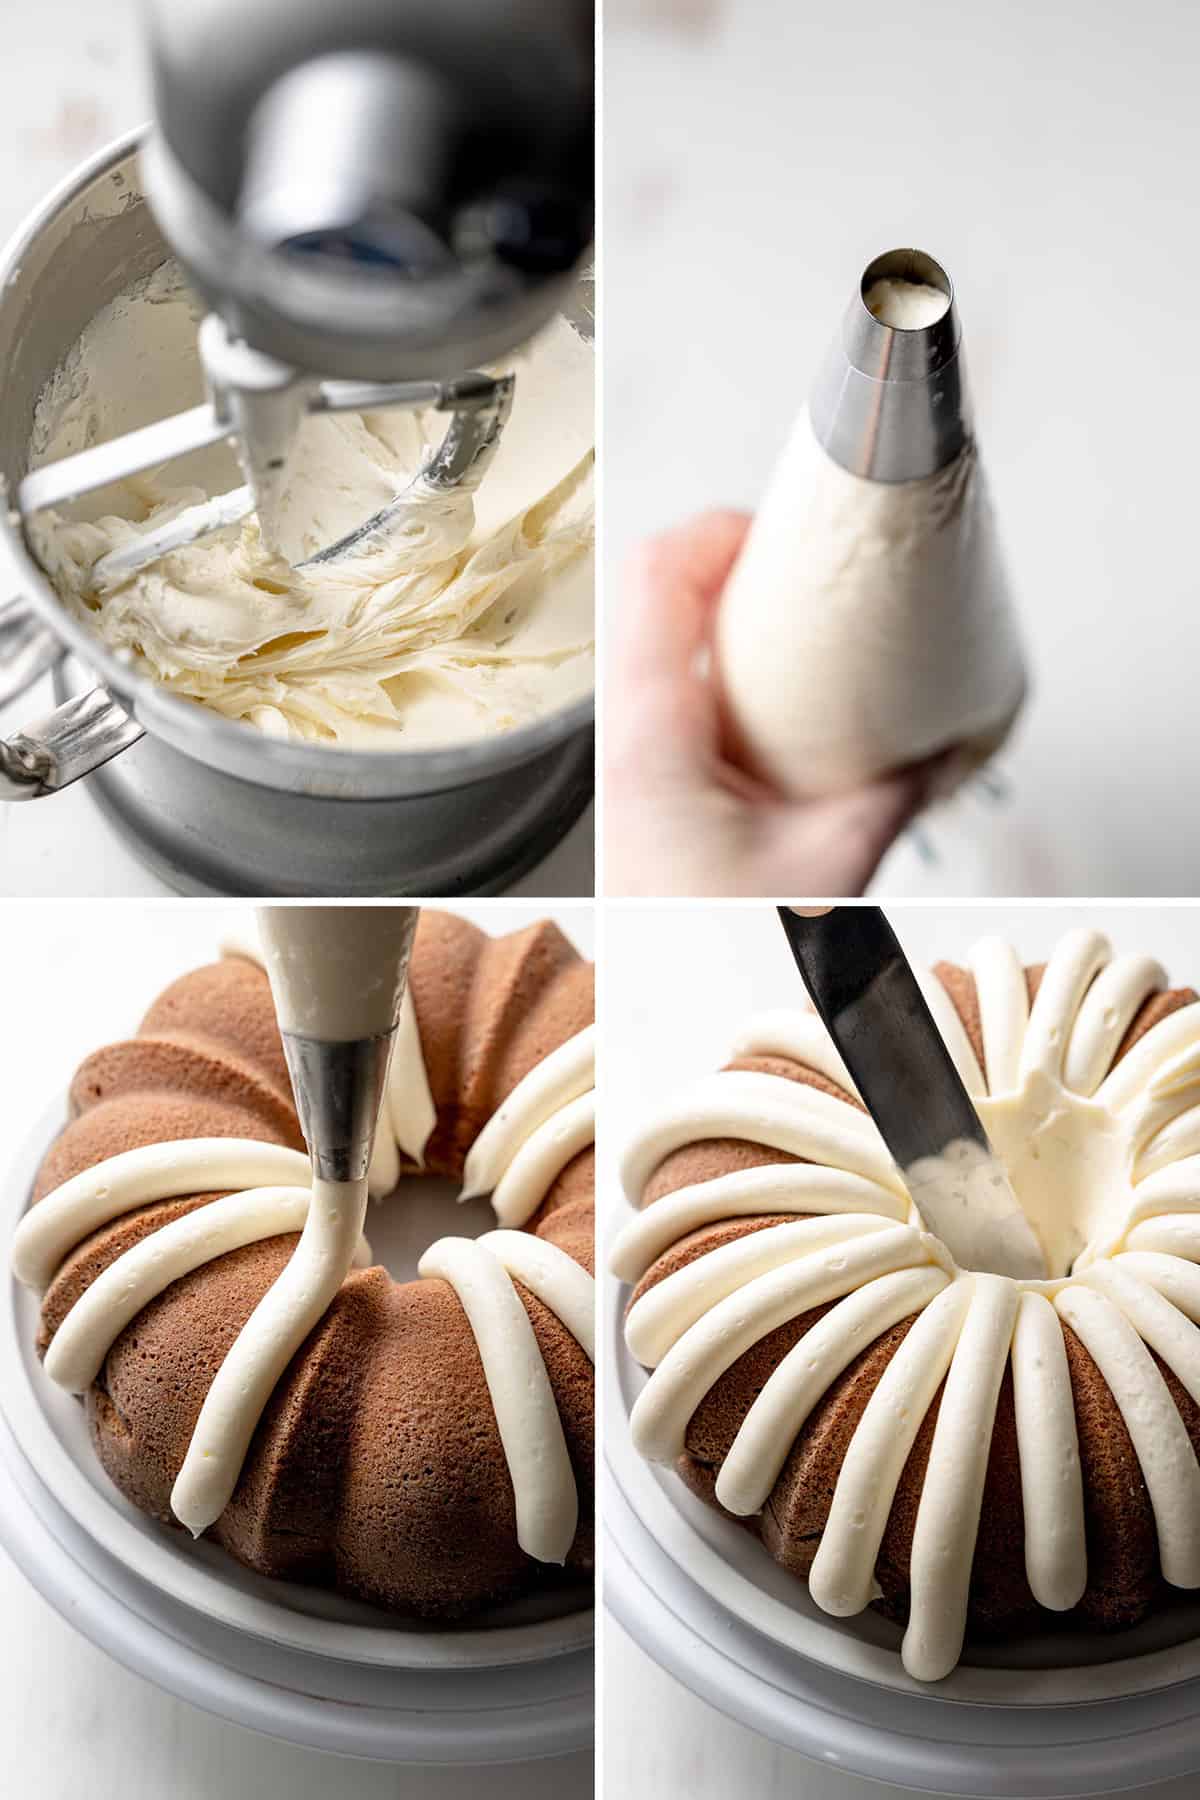 Image collage: Cream cheese frosting in mixer bowl, icing in piping bag with round tip, piping lines on bundt cake, and spatula smoothing center hole.